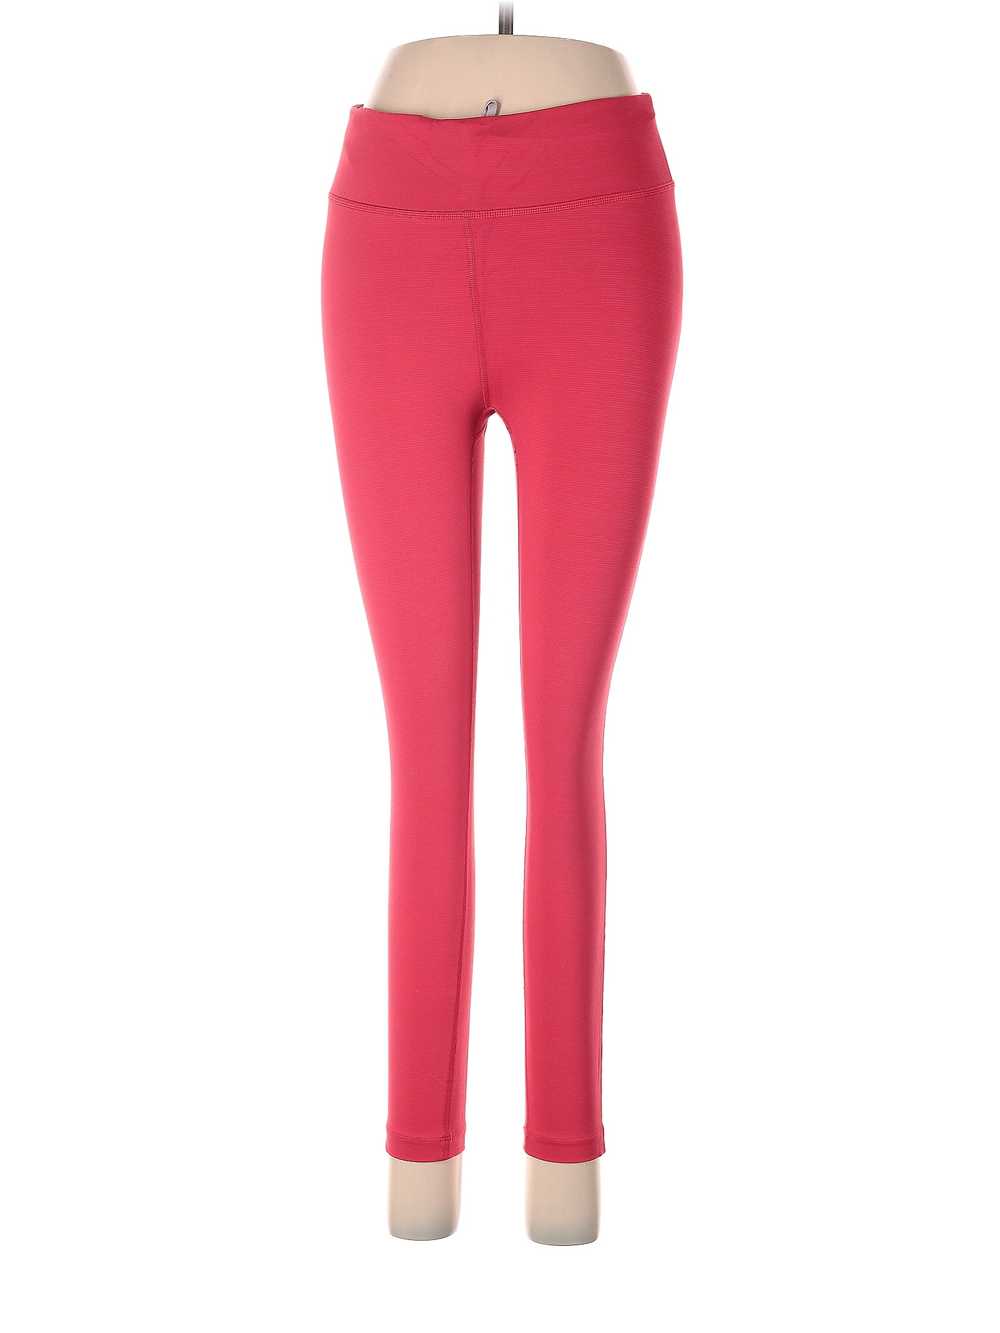 Outdoor Voices Women Red Active Pants M - image 1